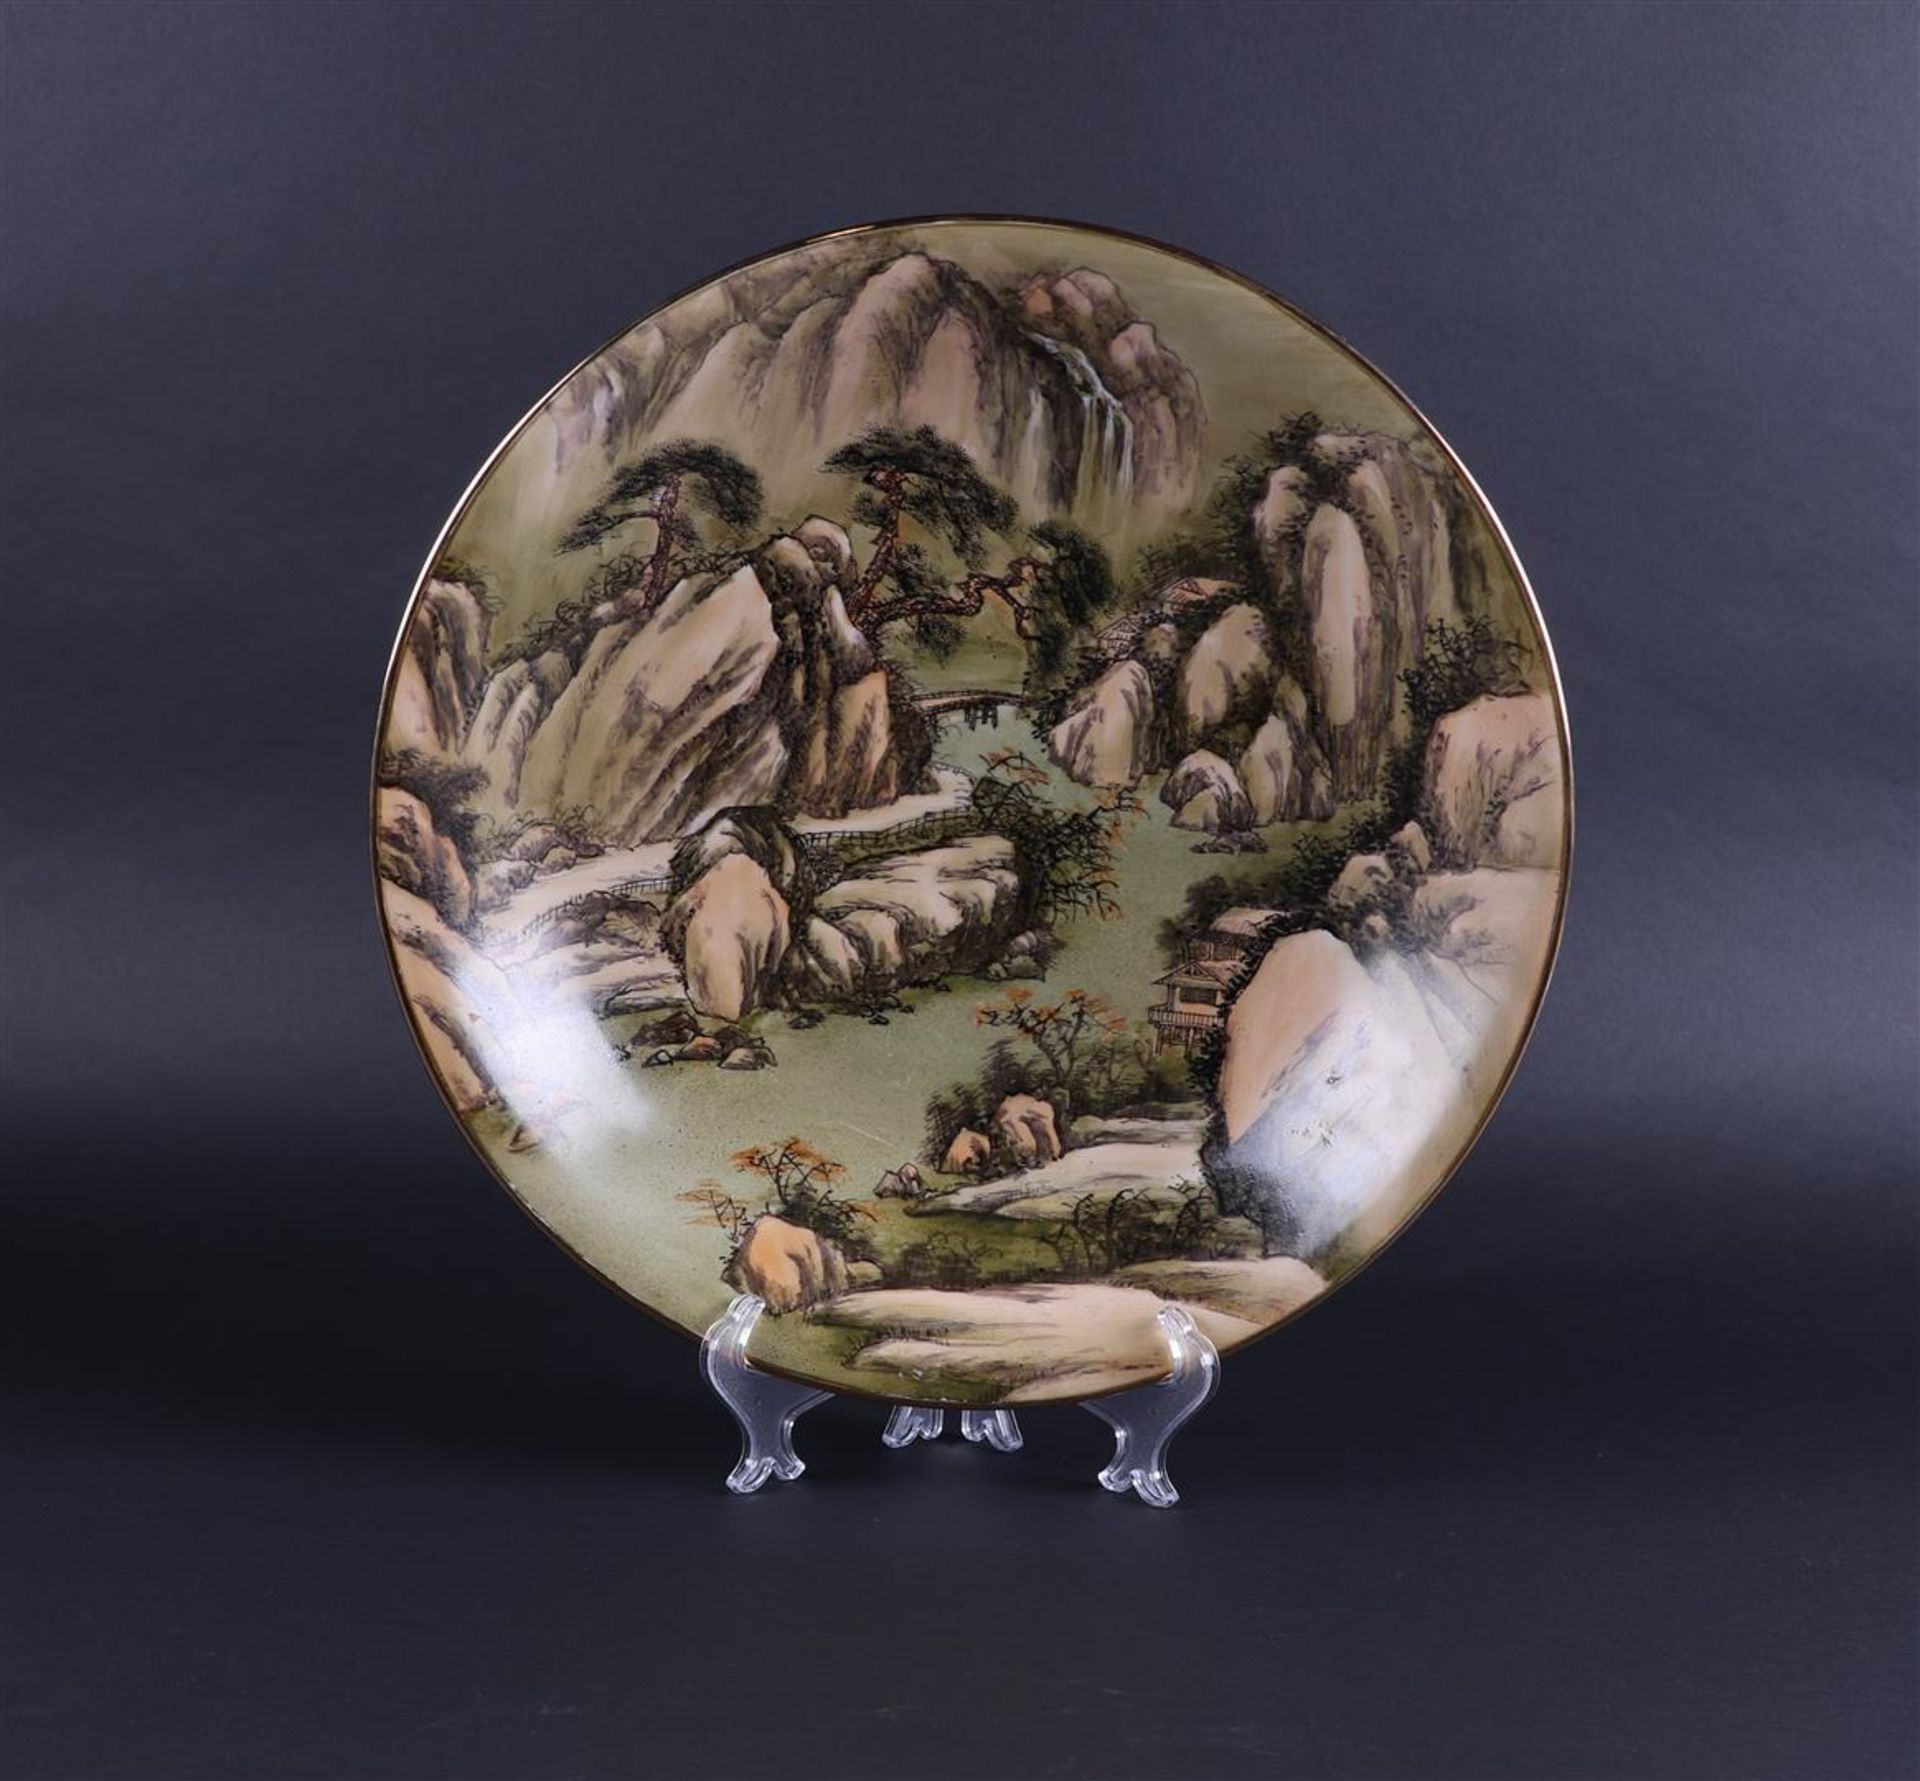 A large porcelain dish decorated with a Chinese Landscape. China, 20th century.